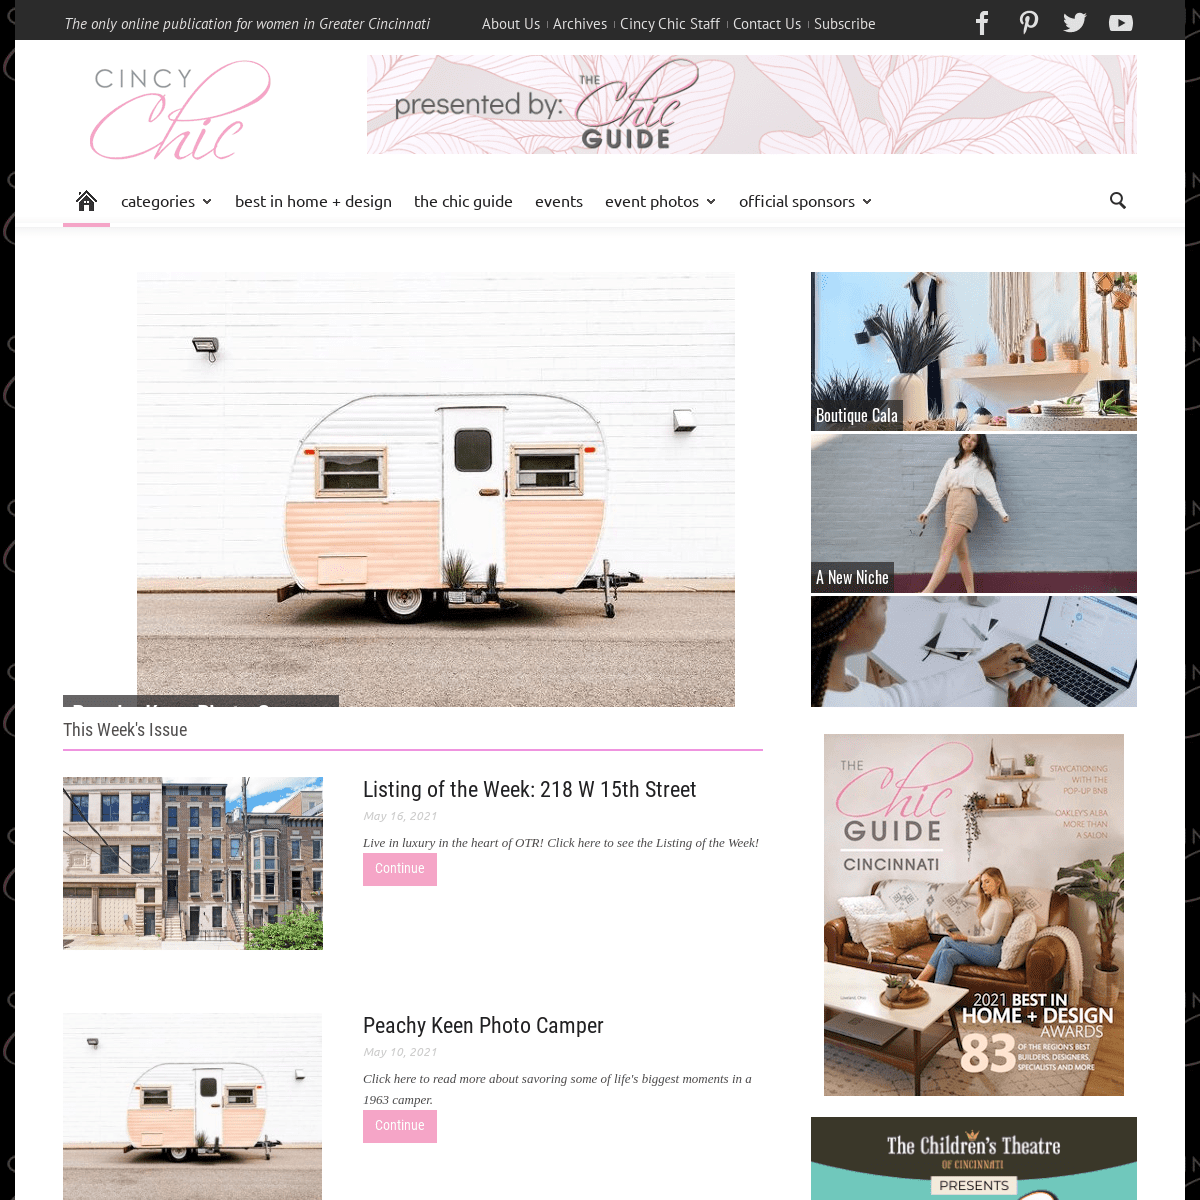 A complete backup of https://cincychic.com